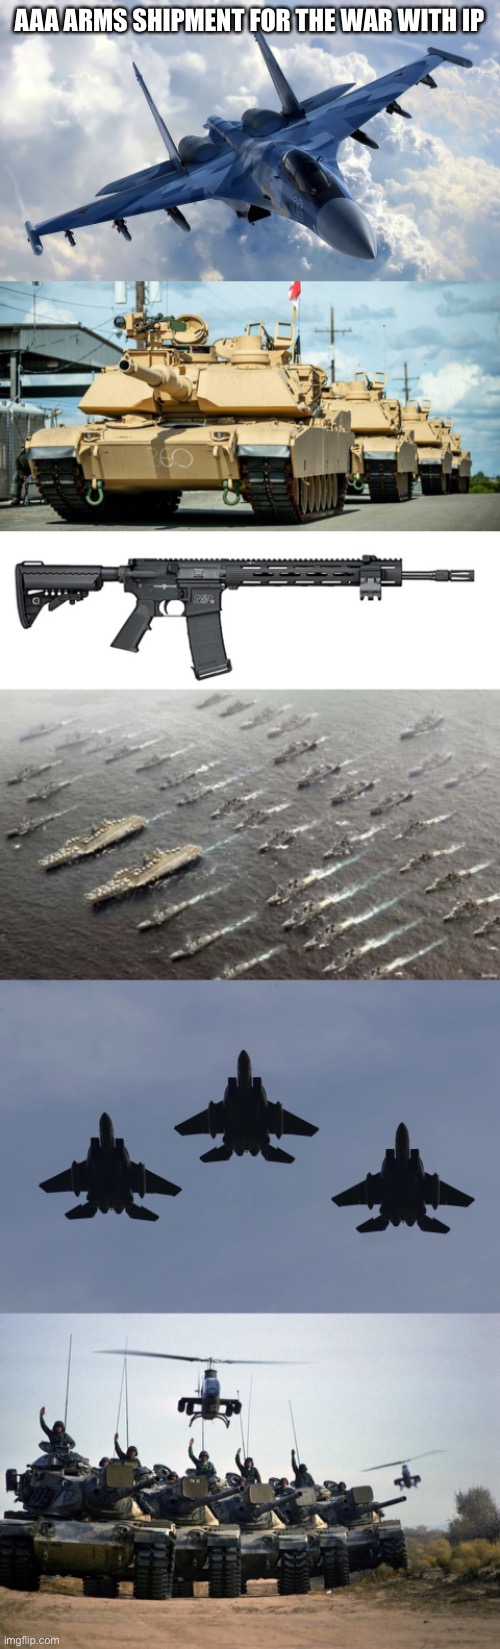 AAA ARMS SHIPMENT FOR THE WAR WITH IP | image tagged in fighter jet,army of tanks,s w assault rifle,migration of us navy ships,fighter jet postal worker,tanks | made w/ Imgflip meme maker